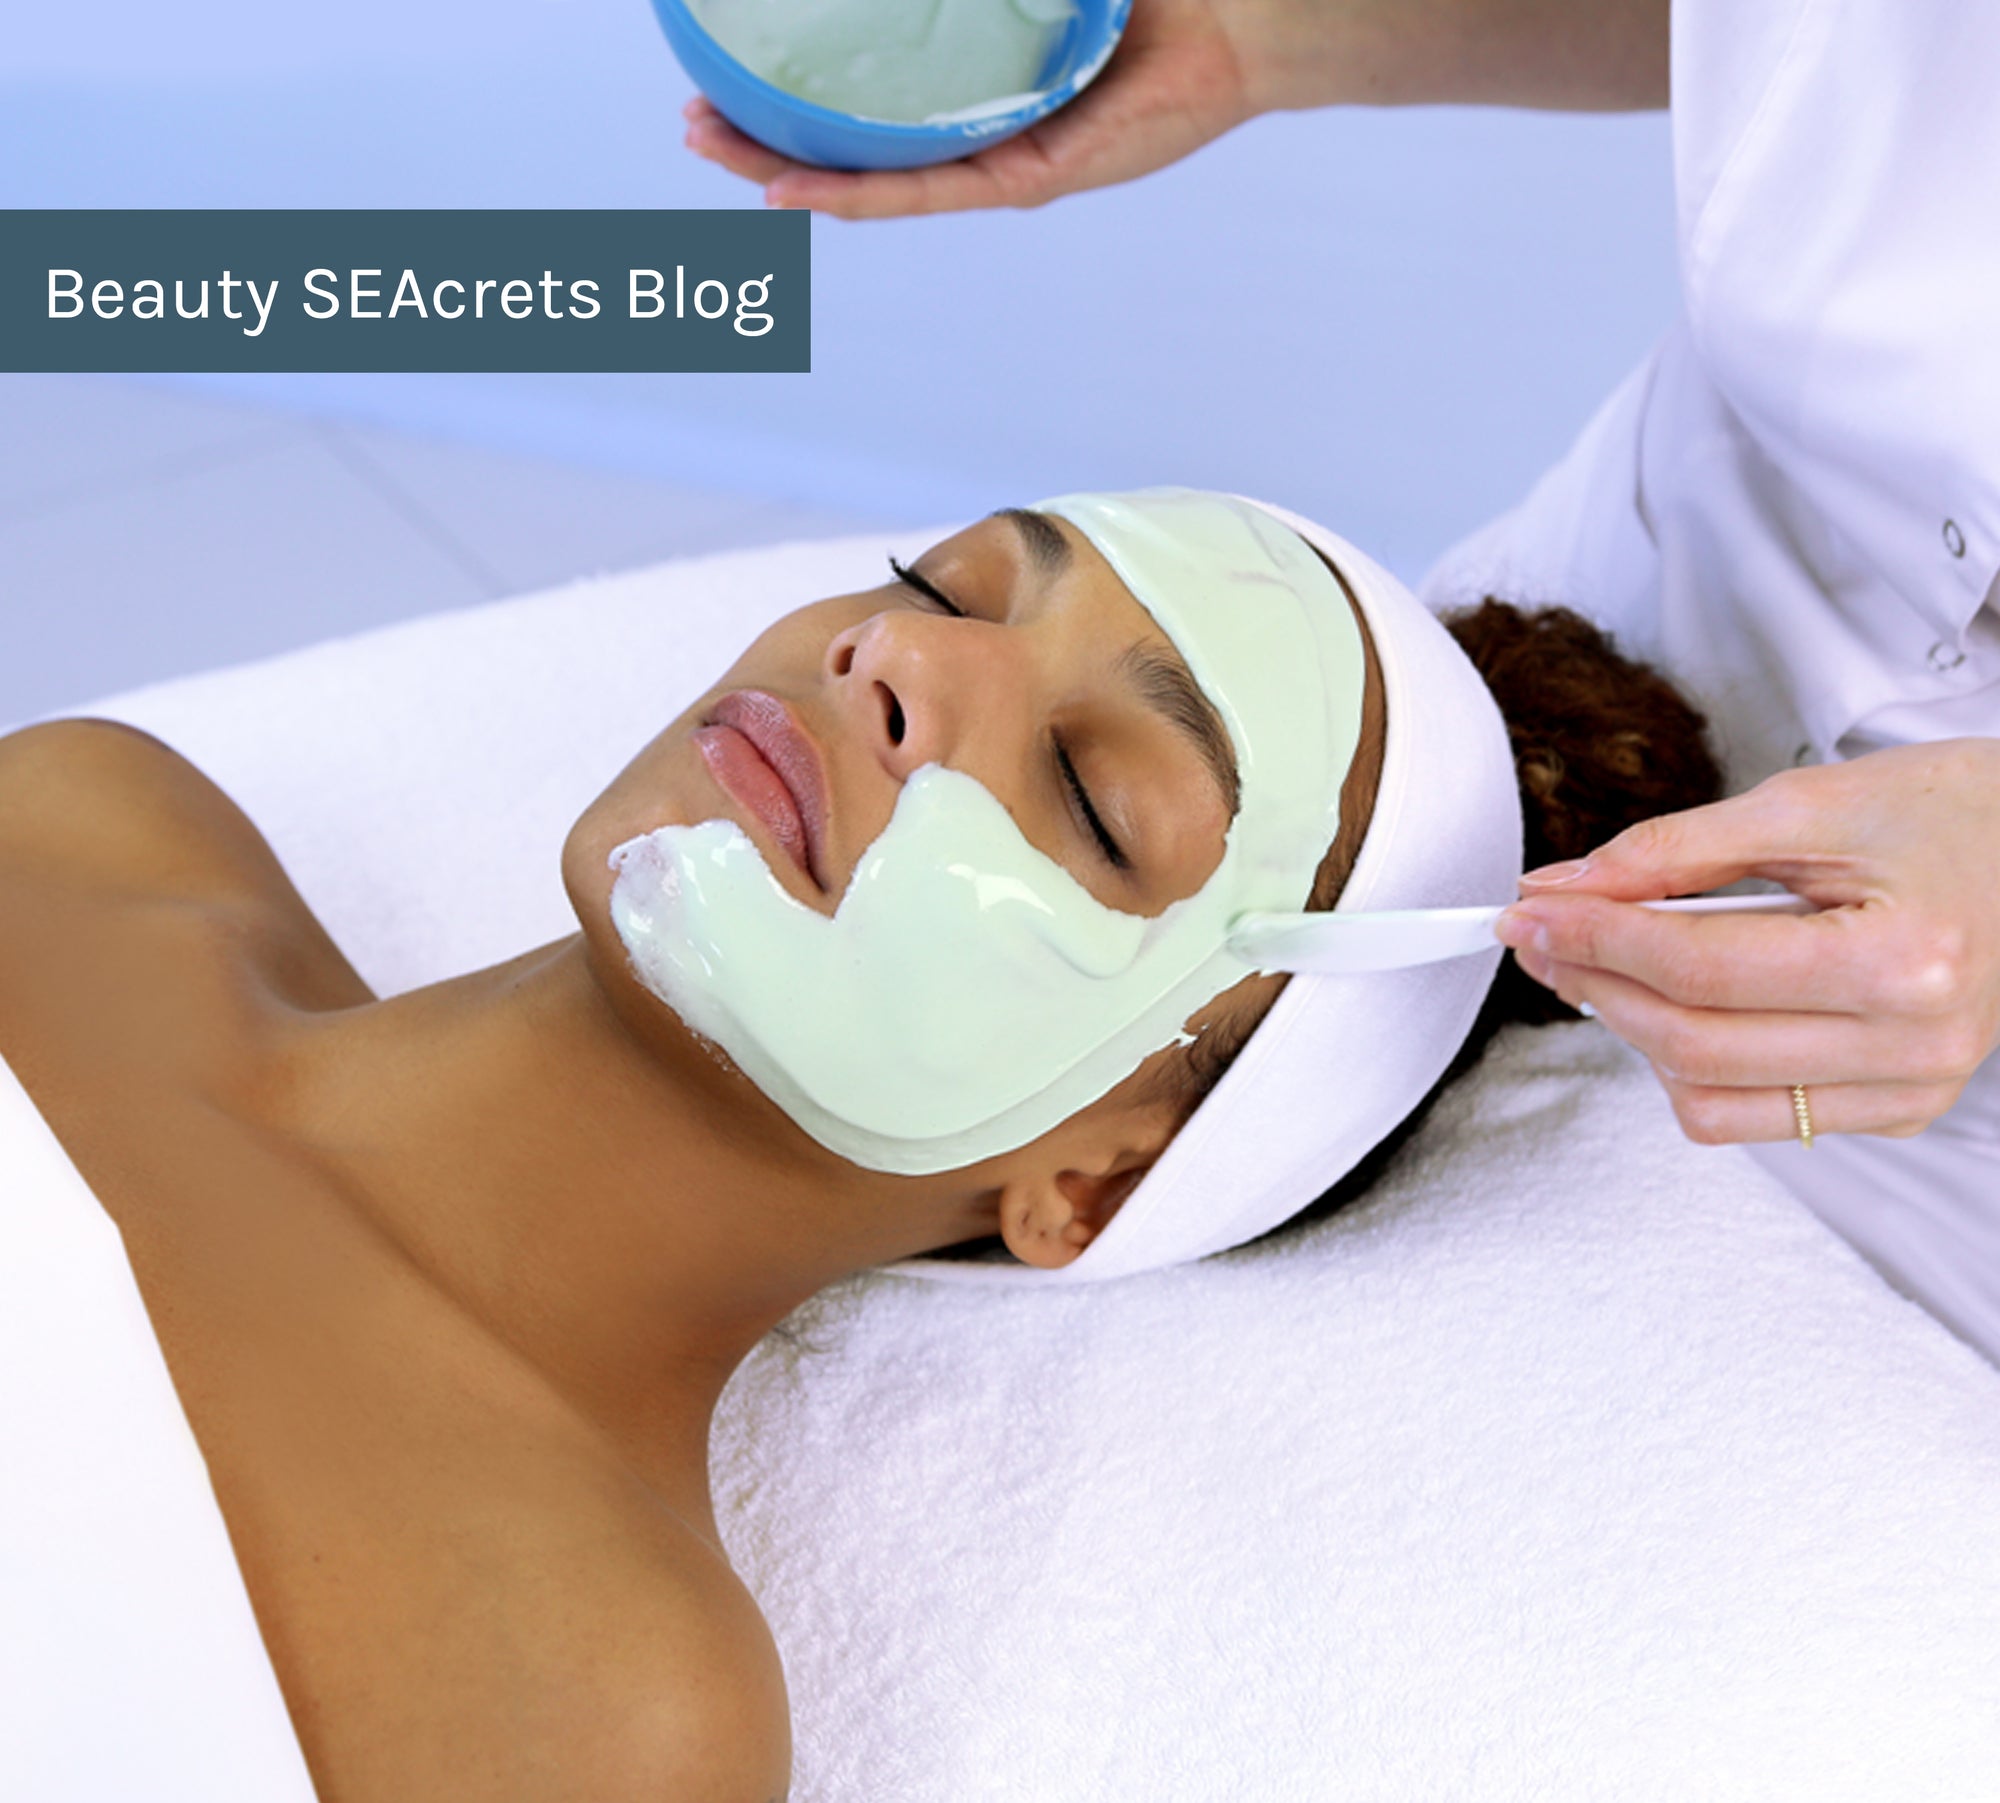 10 Signs You’re an Esthetician (or are Meant to Be One!)